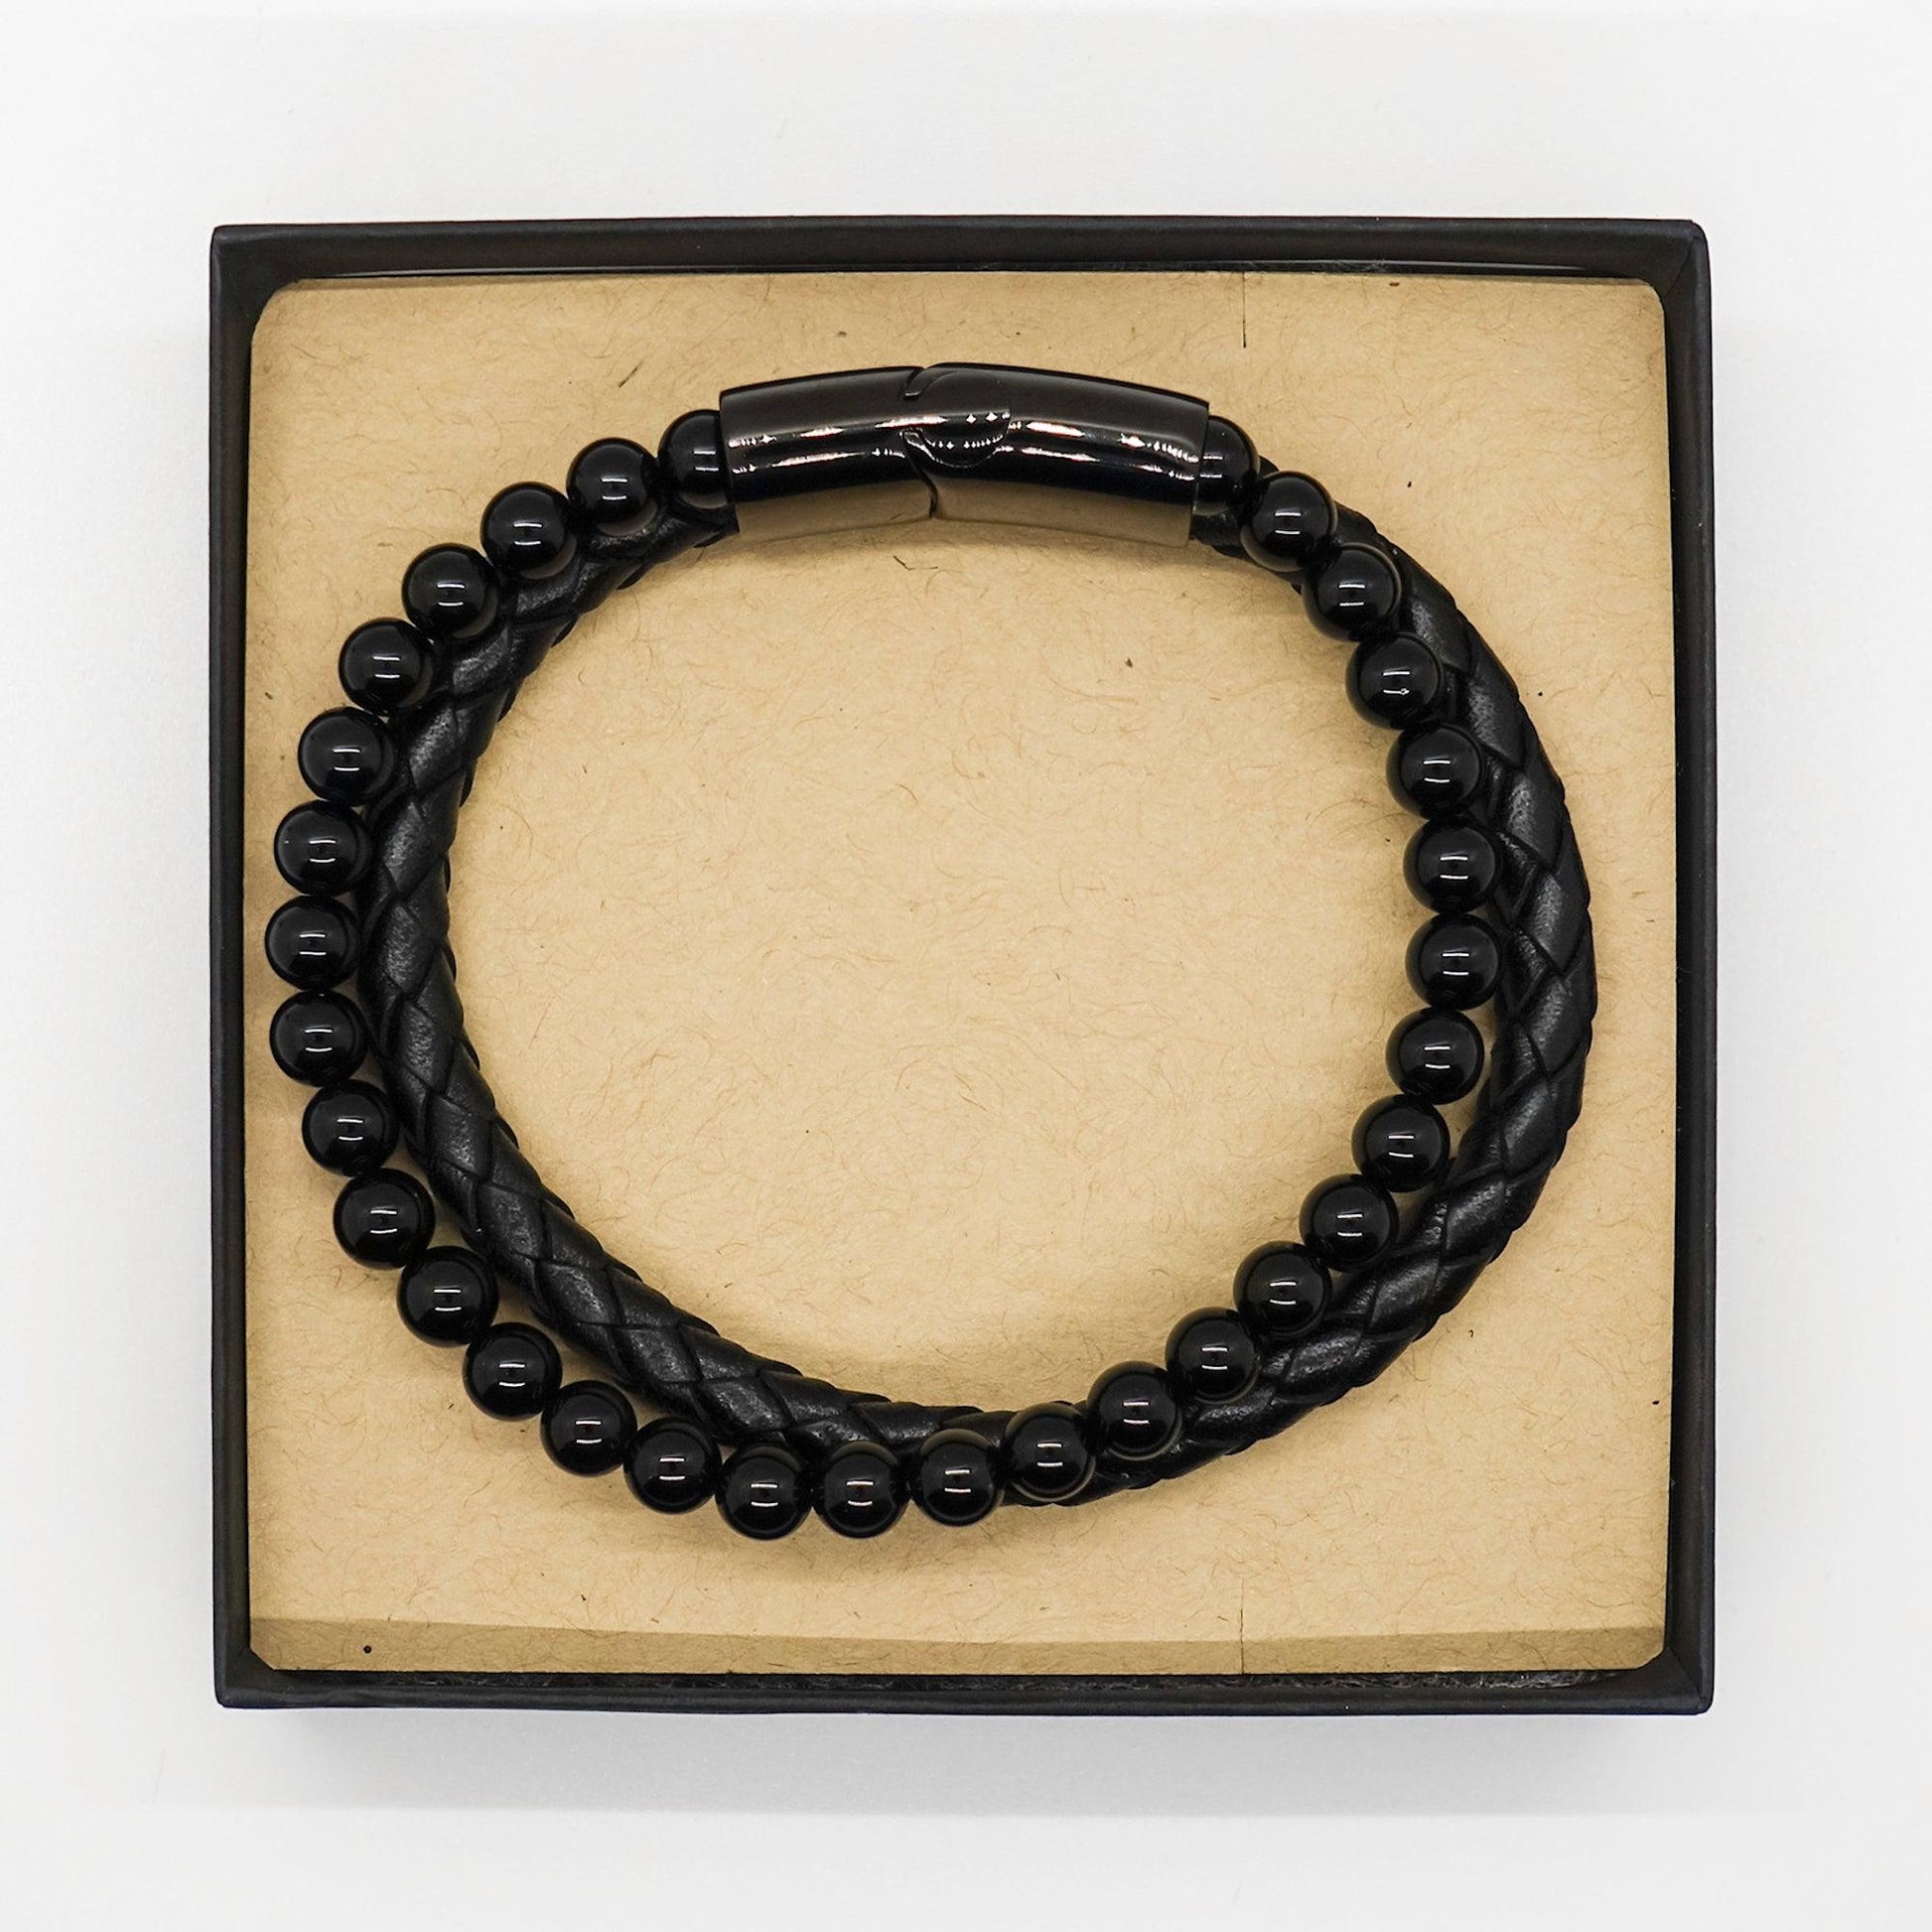 Dog Groomer Black Braided Leather Stone Bracelet - Thanks for being who you are - Birthday Christmas Jewelry Gifts Coworkers Colleague Boss - Mallard Moon Gift Shop